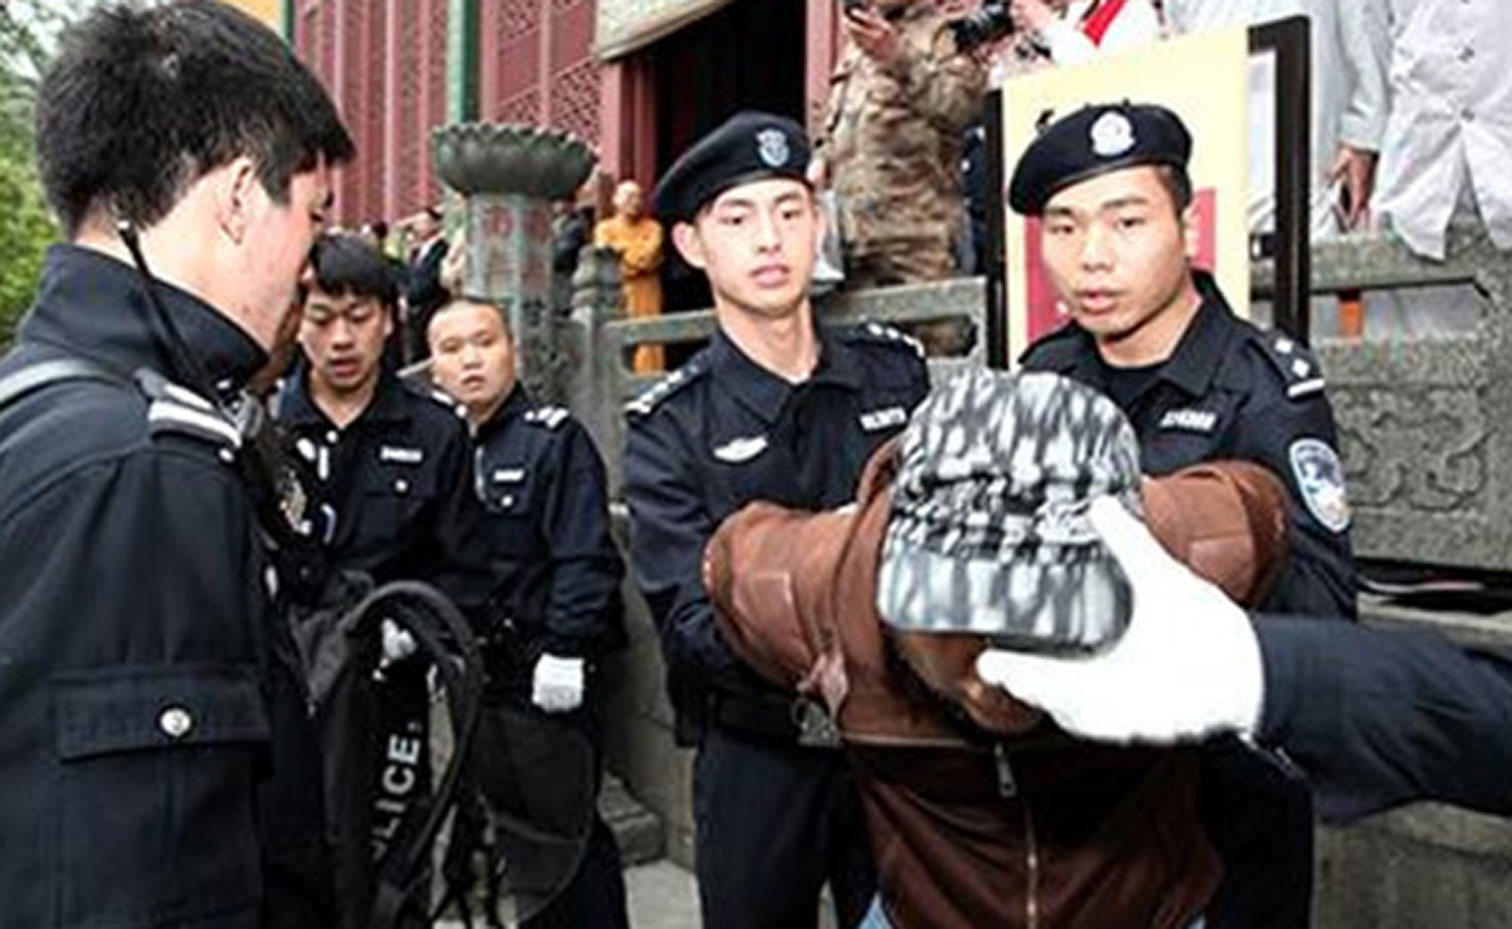 Members of the squad demonstrate how they would restrain a suspect. Photo: SCMP